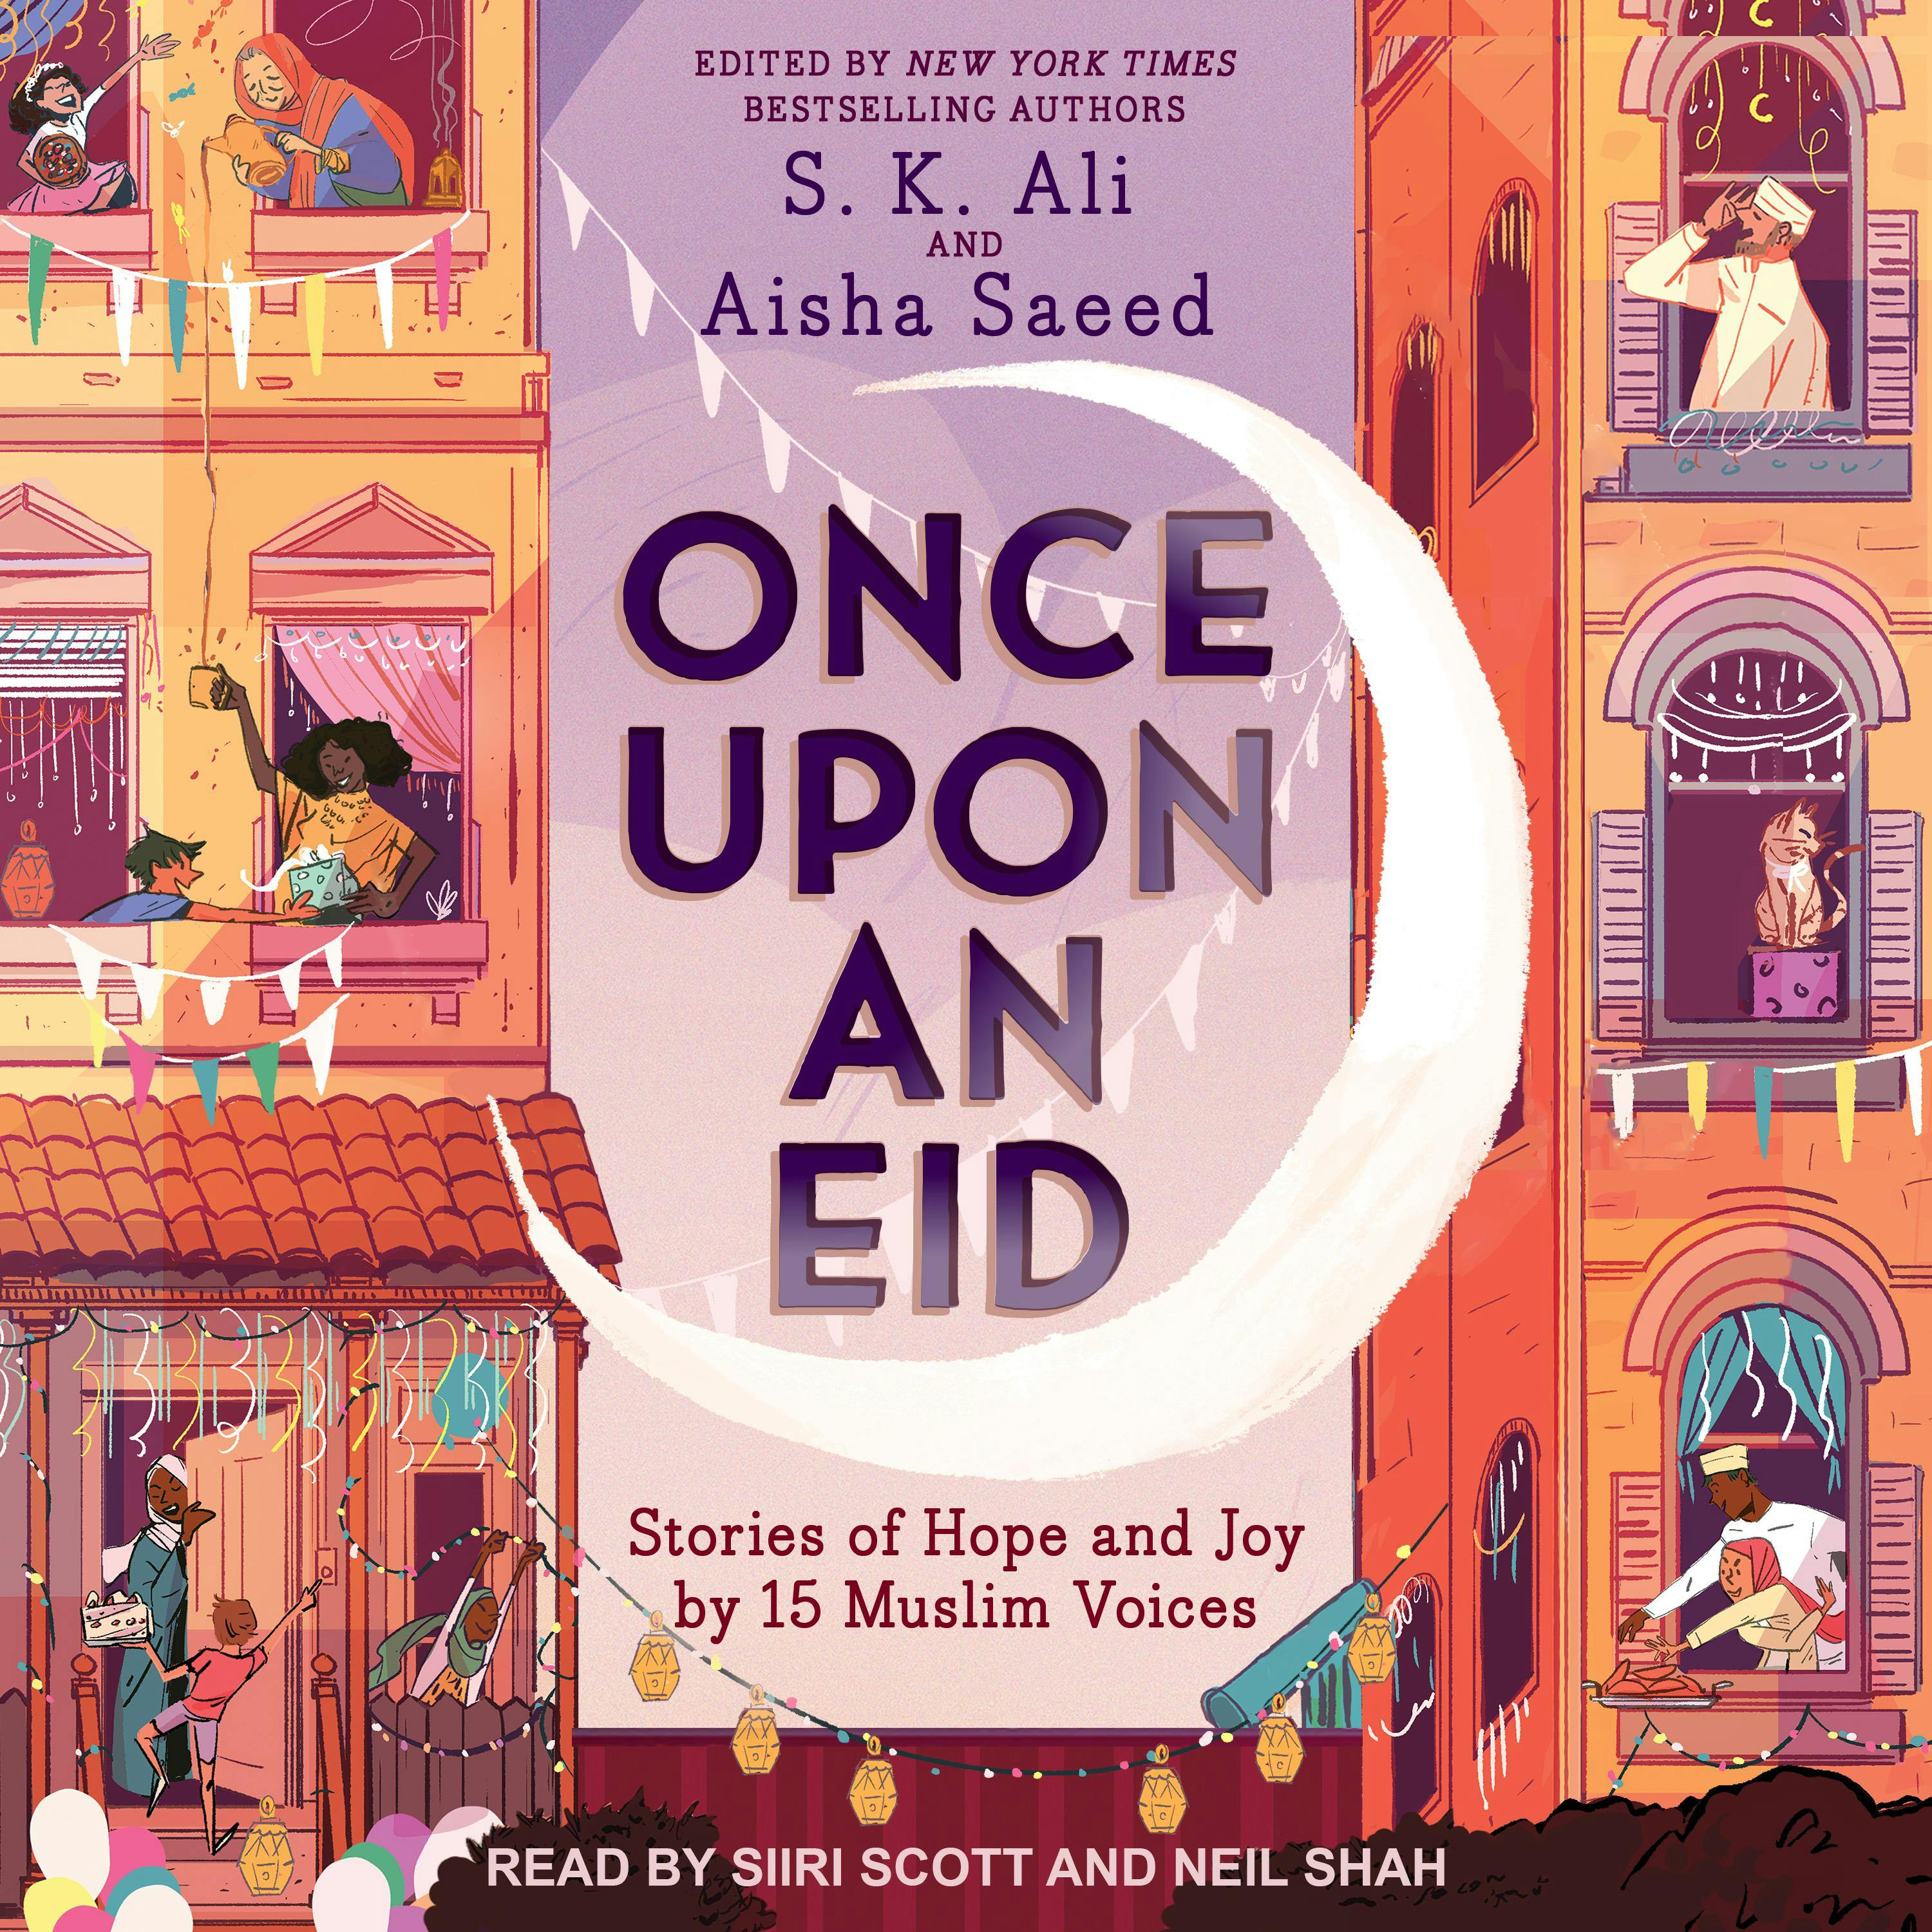 Once Upon an Eid: Stories of Hope and Joy by 15 Muslim Voices - Aisha Saeed, S.K. Ali